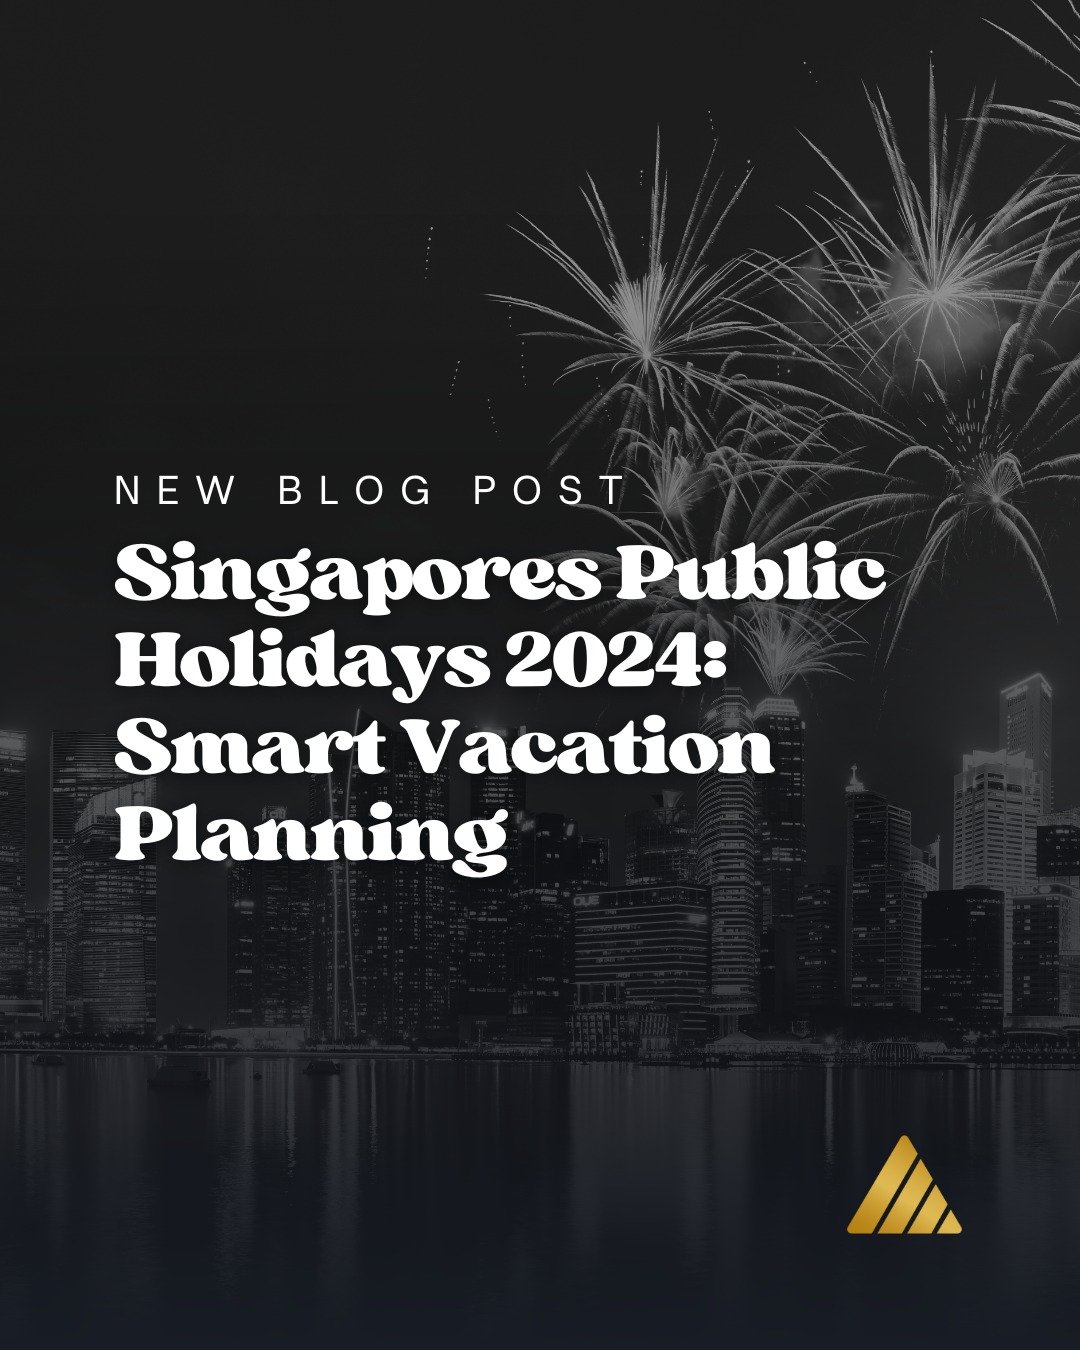 Singapore's 2024 public holidays are your ticket to adventure. But how do you maximize those days off? Our in-depth guide offers:

✔ Long weekend planning strategies
✔ Holiday-specific tips
✔ Insights into Singapore's cultural celebrations

➡️ Get yo